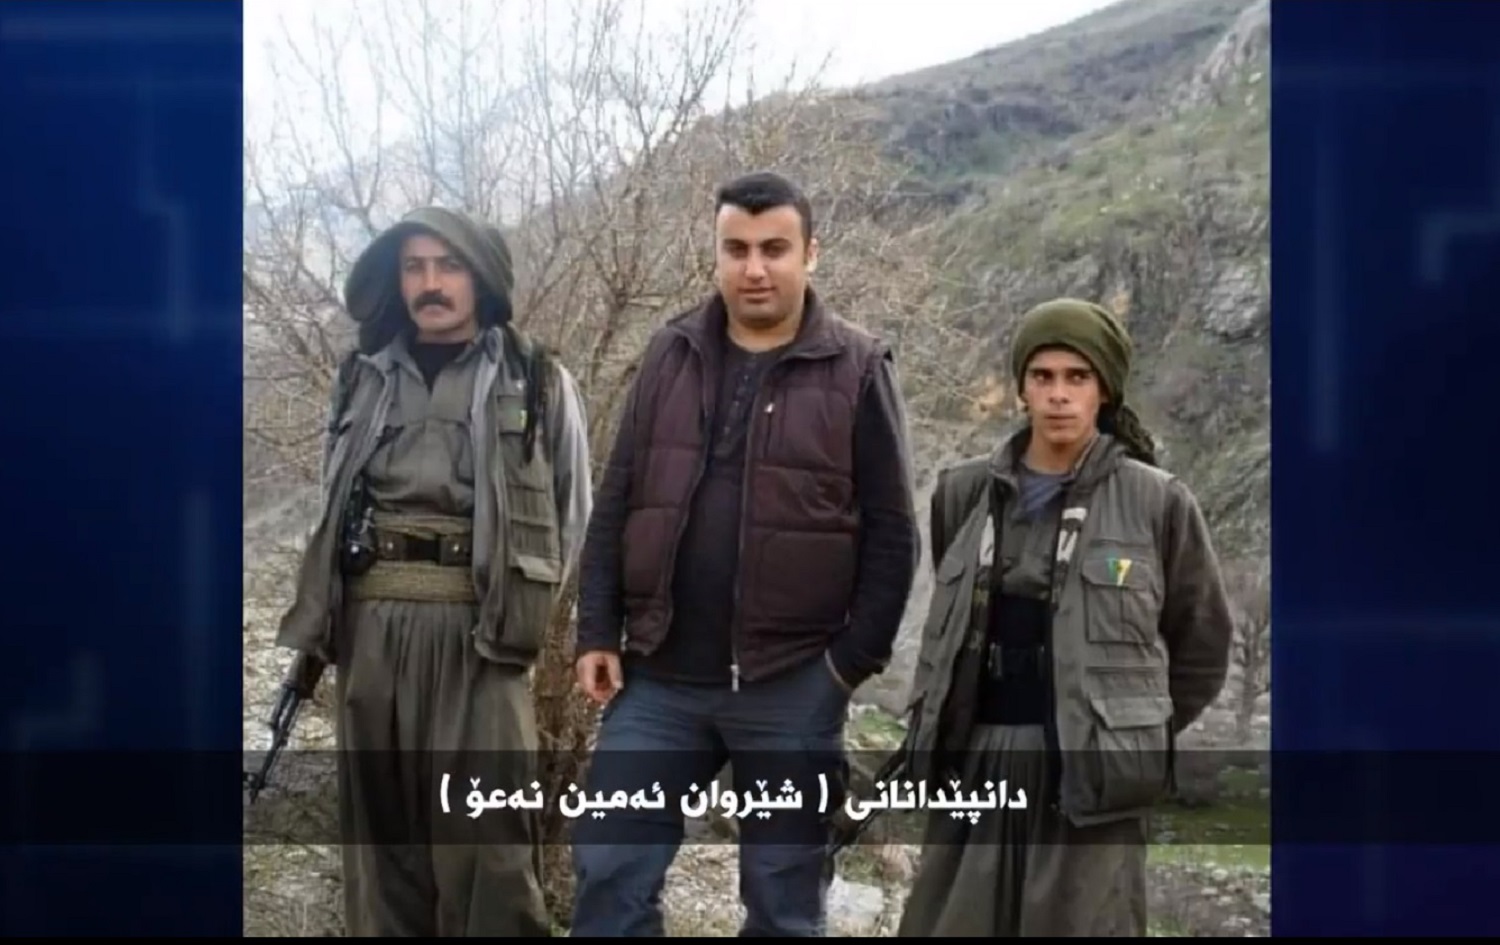 Journalist Sherwan Sherwani in an undated image taken from video released by the Kurdistan Region Security Council purportedly showing him with members of the Kurdistan Workers' Party (PKK). Photo: handout/KRSC